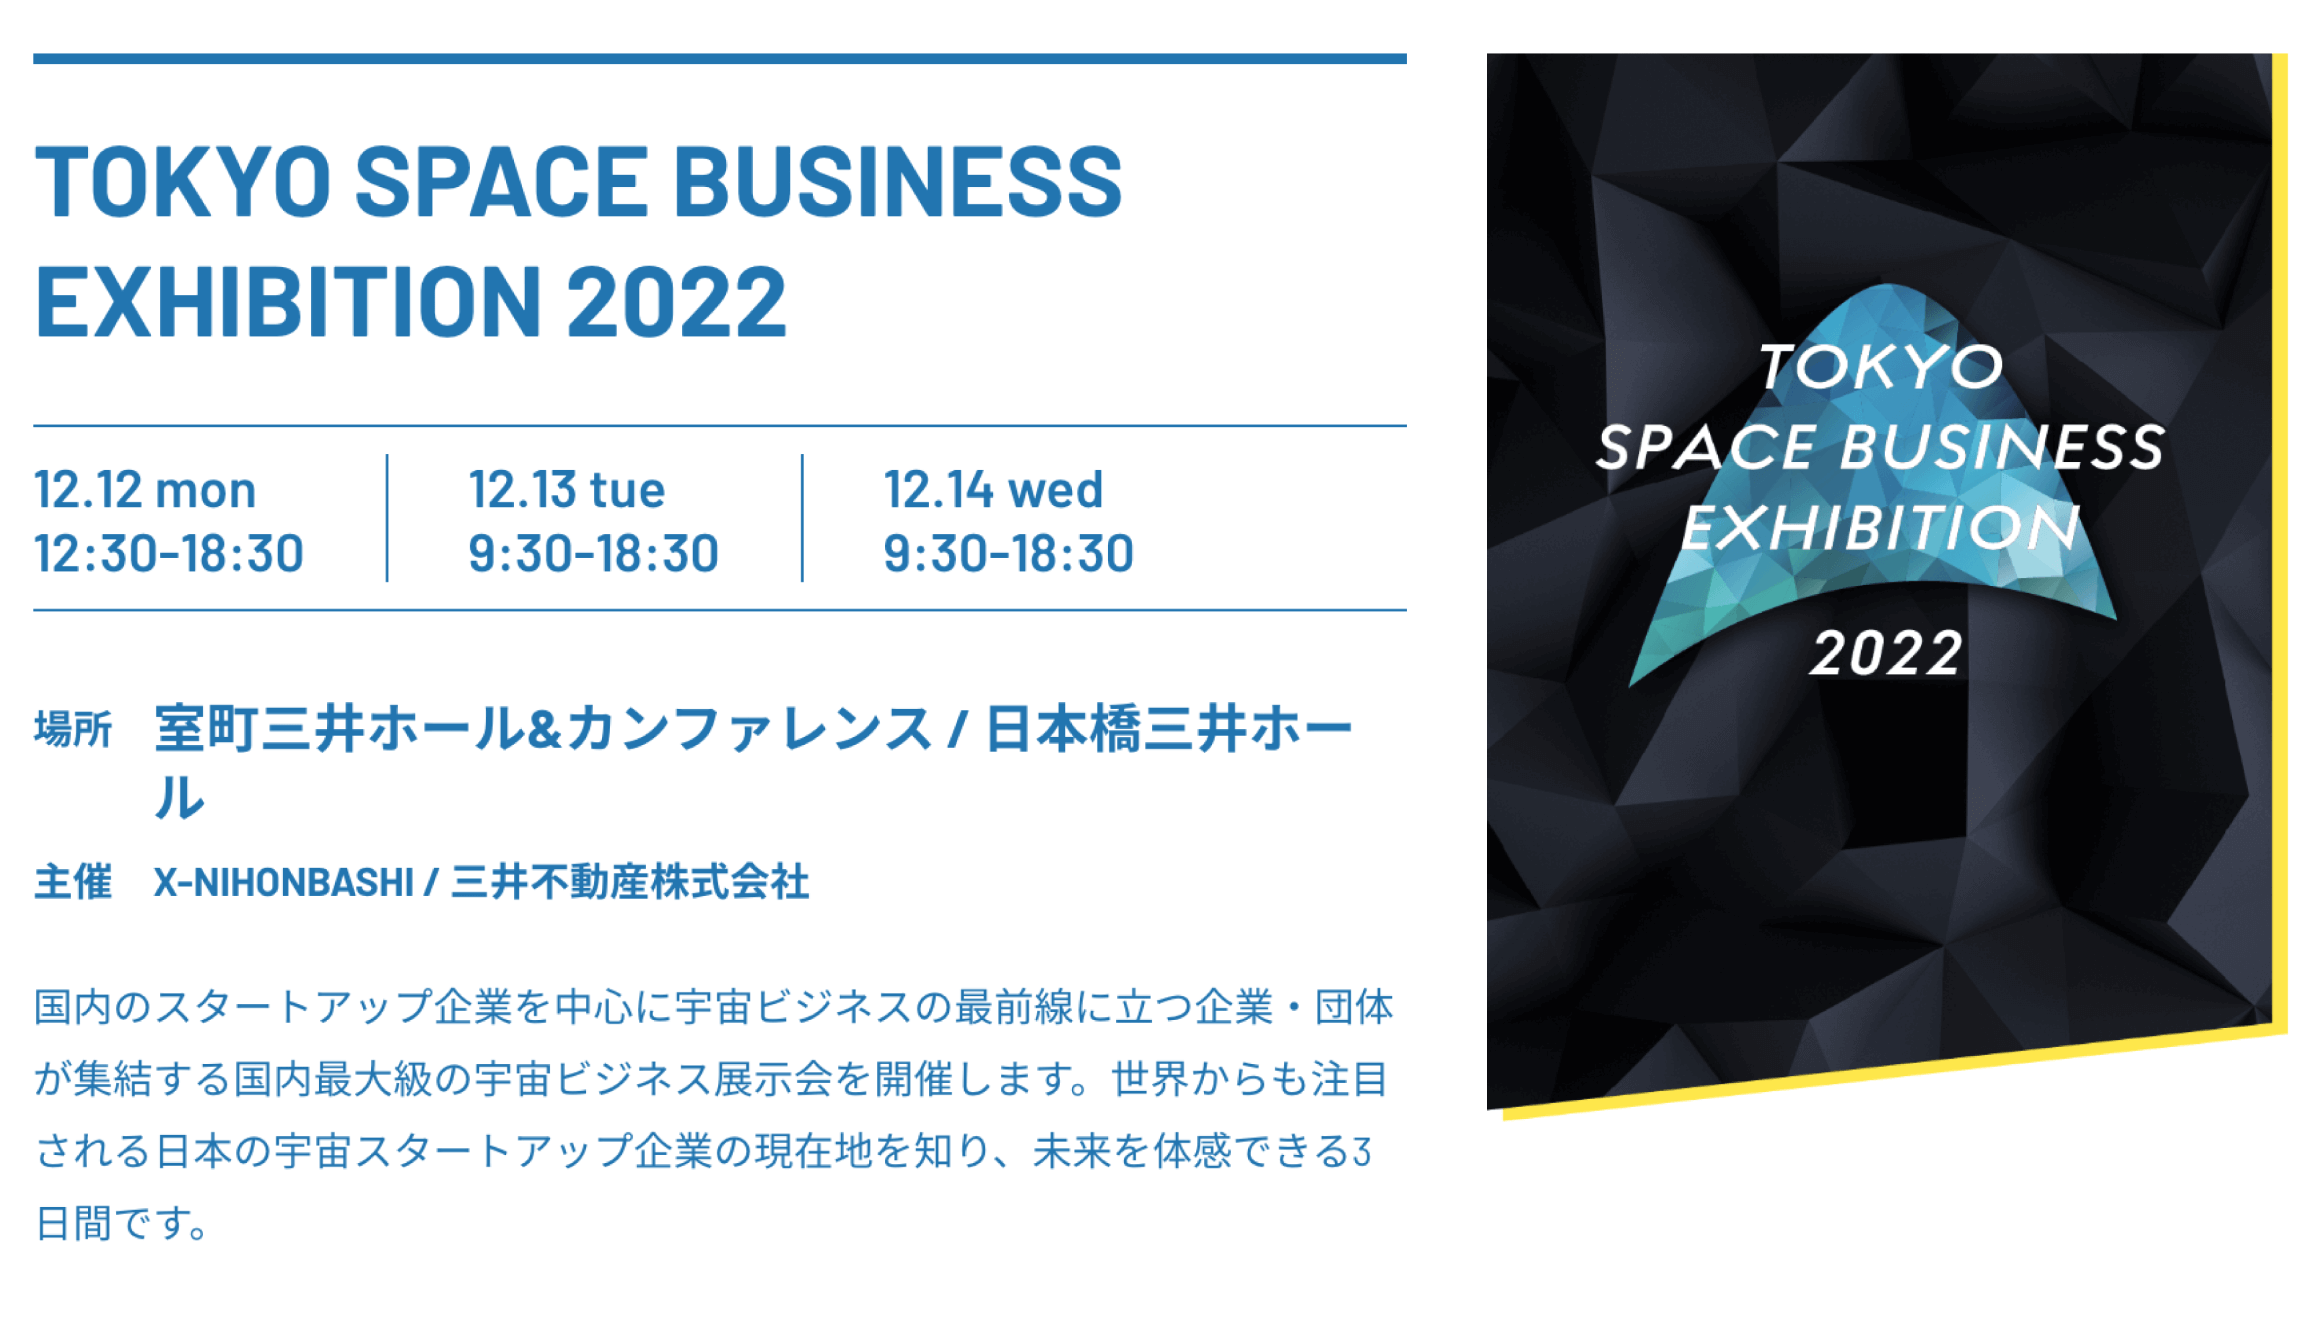 Booth Participation at TOKYO SPACE BUSINESS EXHIBITION 2022 !